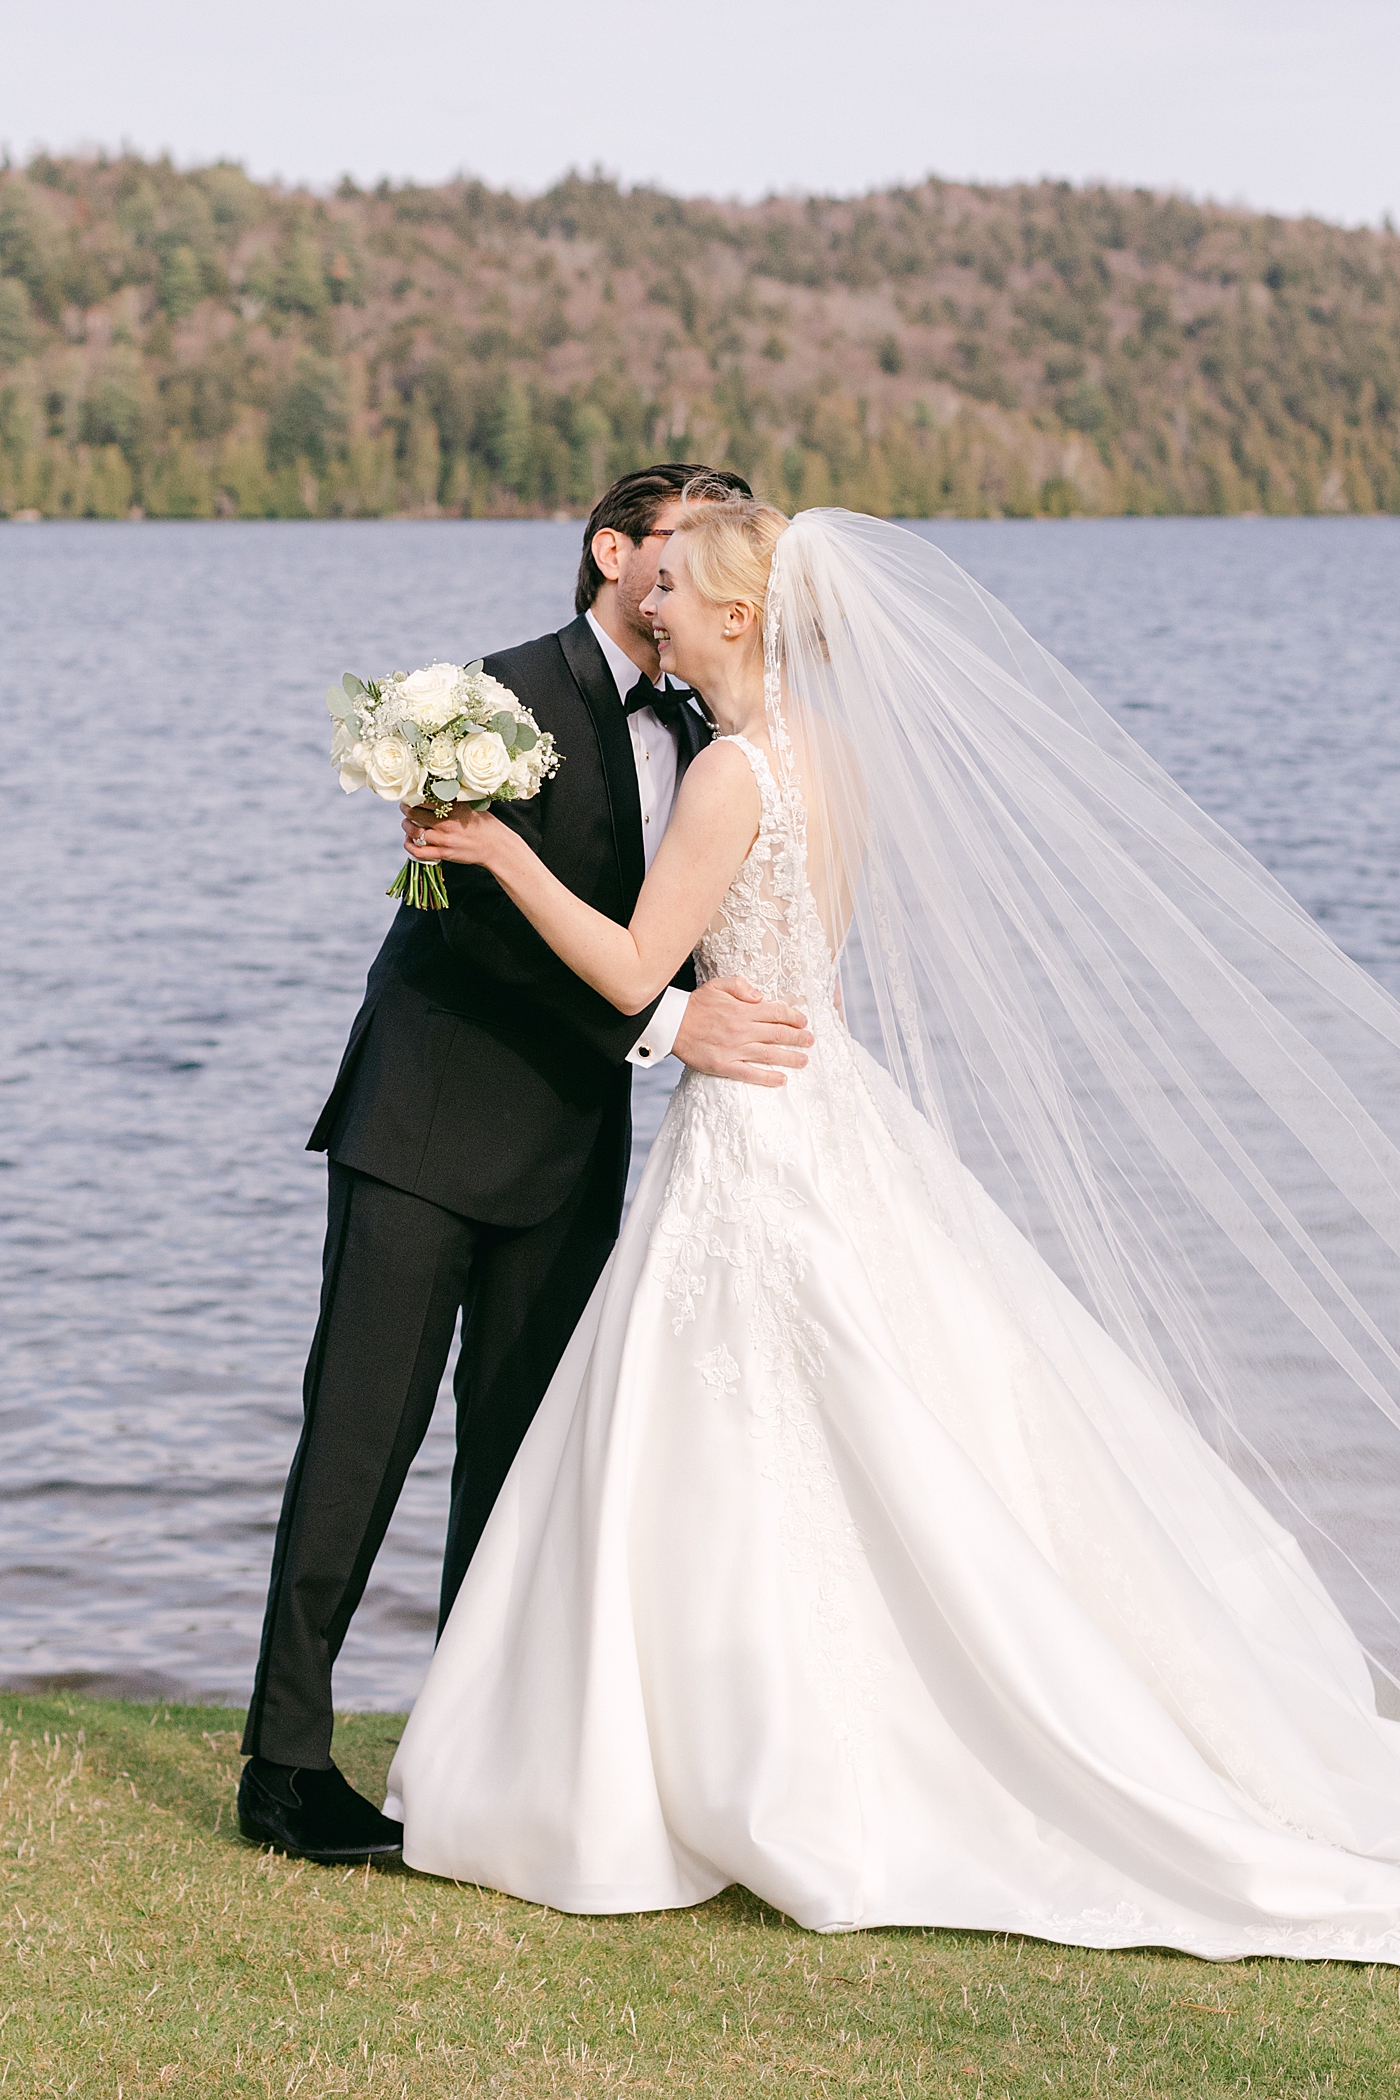 Bride and groom embracing | Image by Hope Helmuth Photography